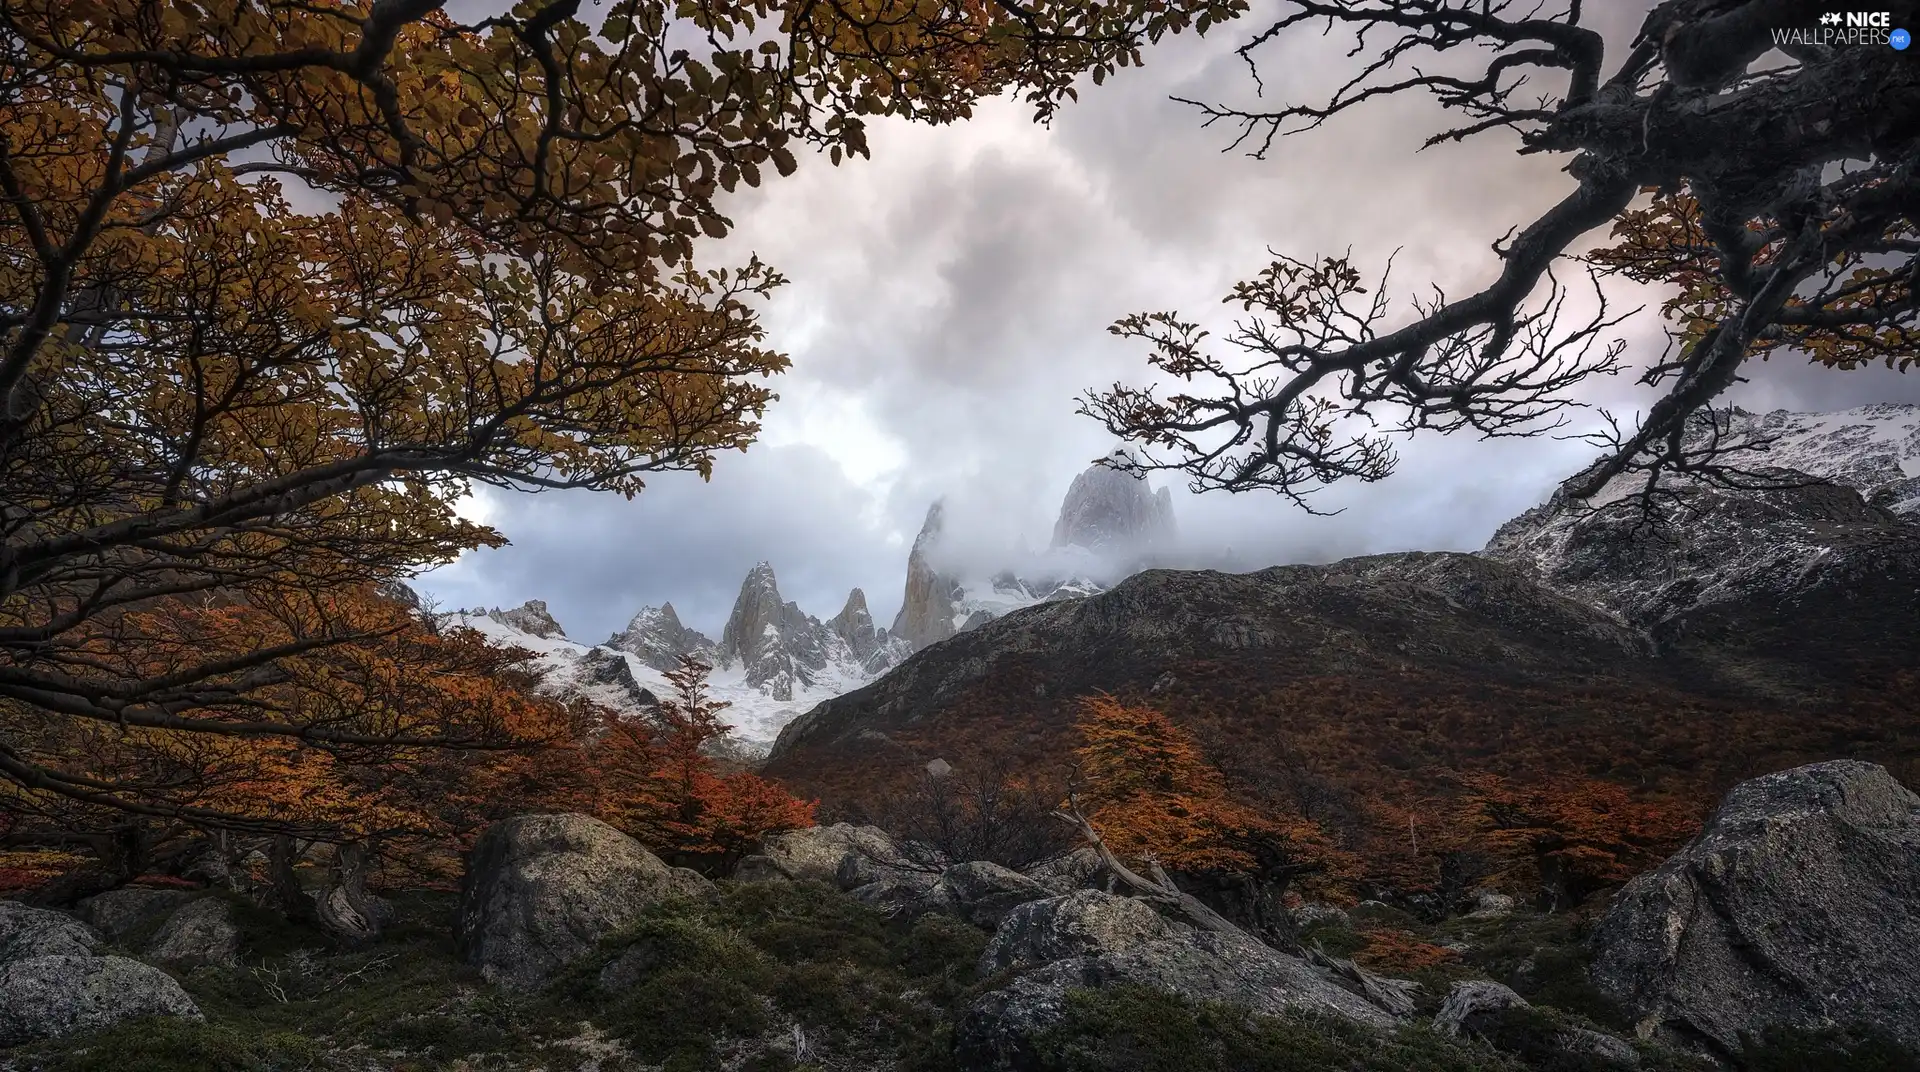 Andes Mountains, autumn, Los Glaciares National Park, trees, Patagonia, Argentina, branch pics, Stones, viewes